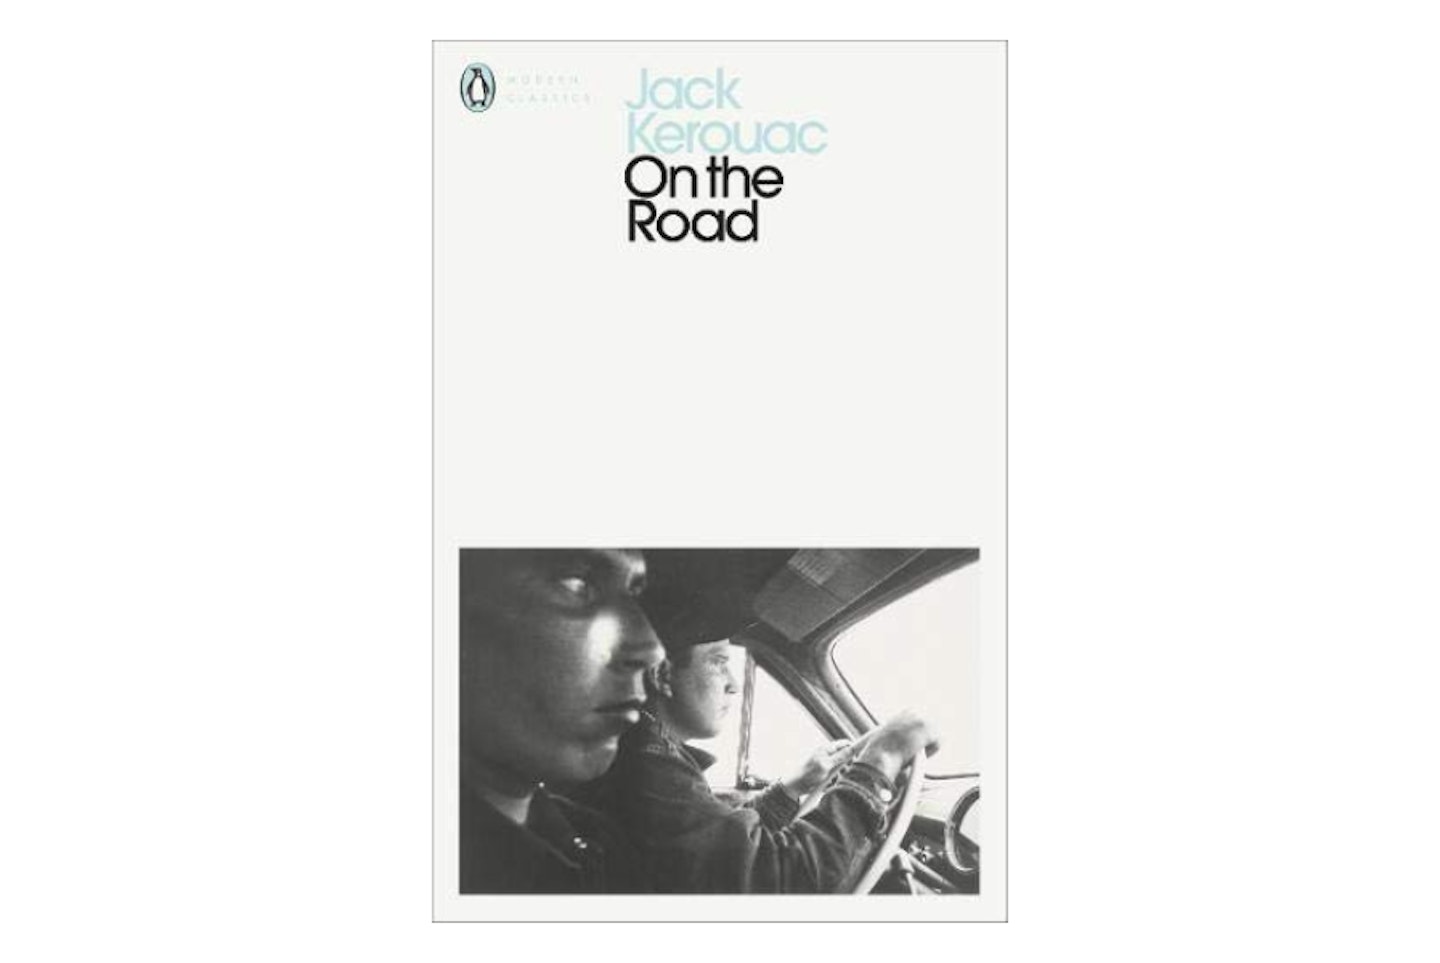 On The Road by Jack Kerouac